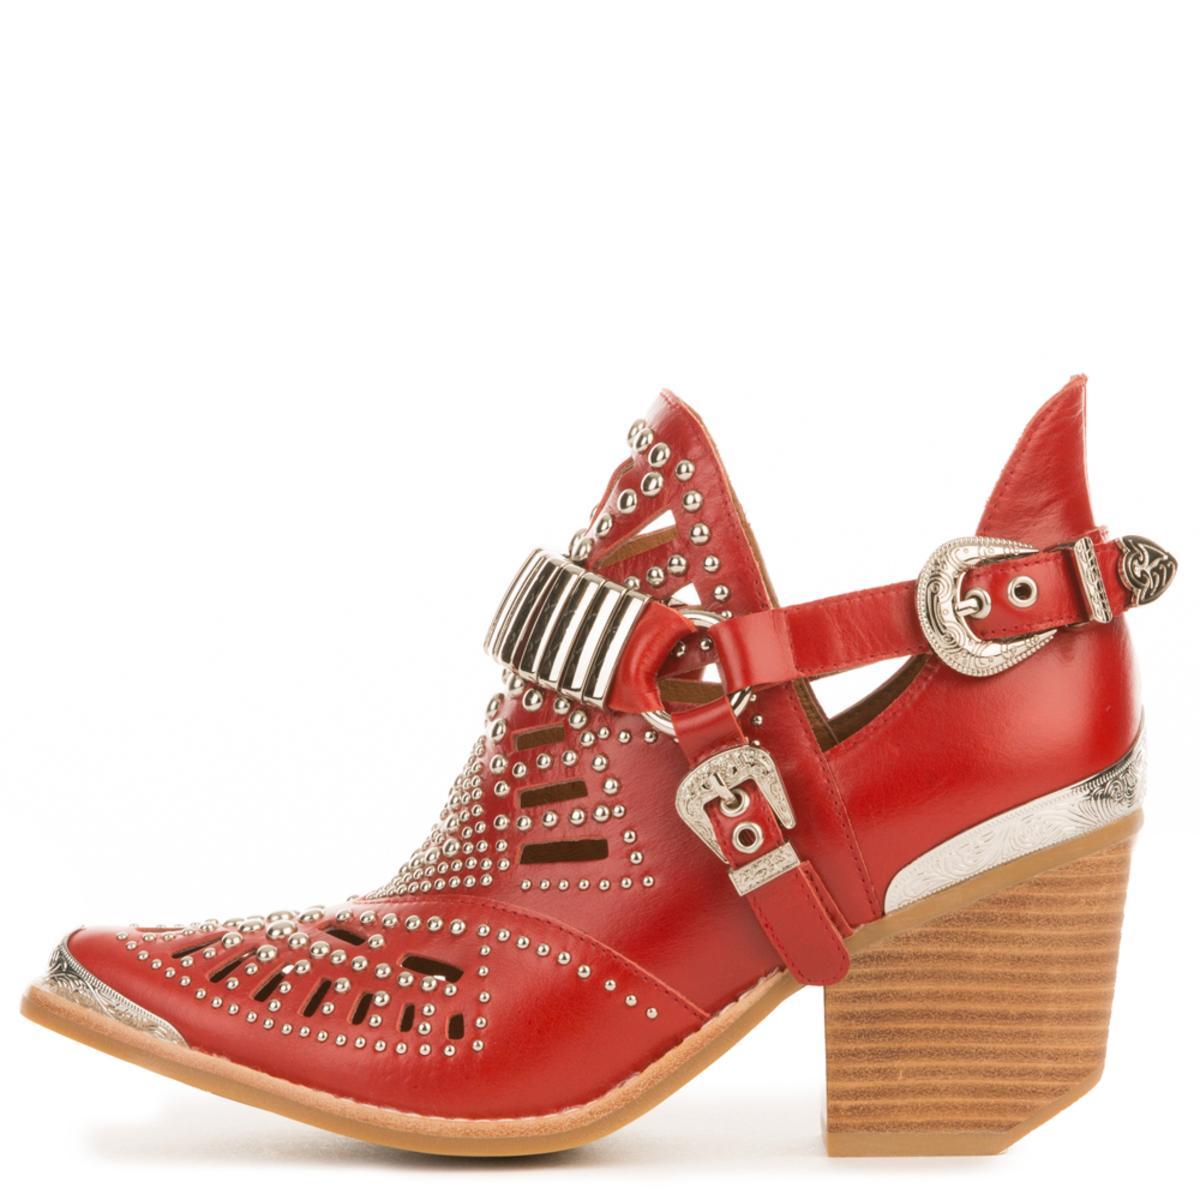 Jeffrey Campbell Calhoun-4 Red Western Heeled Booties Red